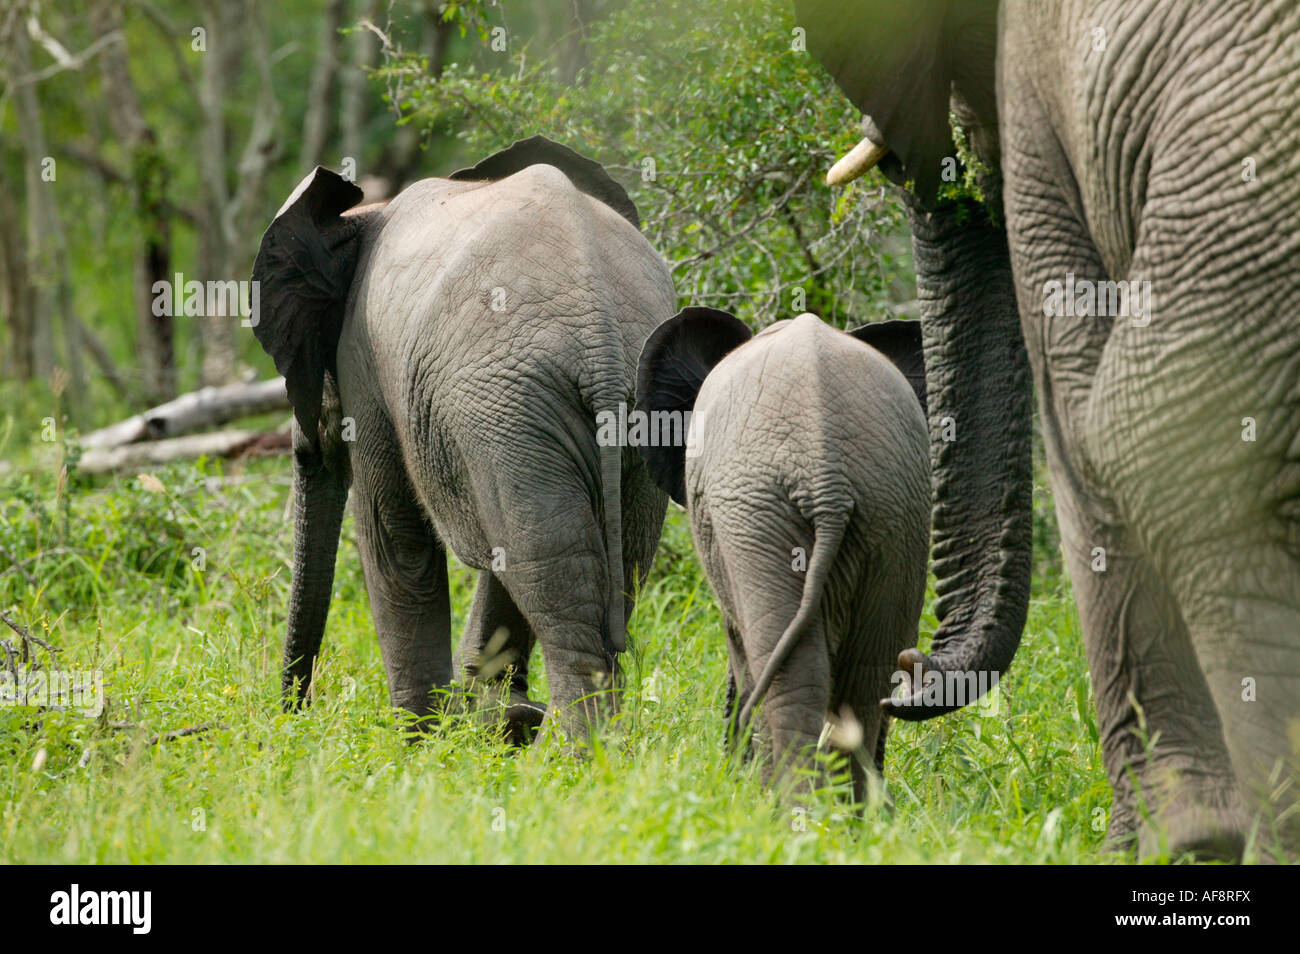 Rear view of three elephant ranging from a young calf to an adult cow walking away ; South Africa Stock Photo